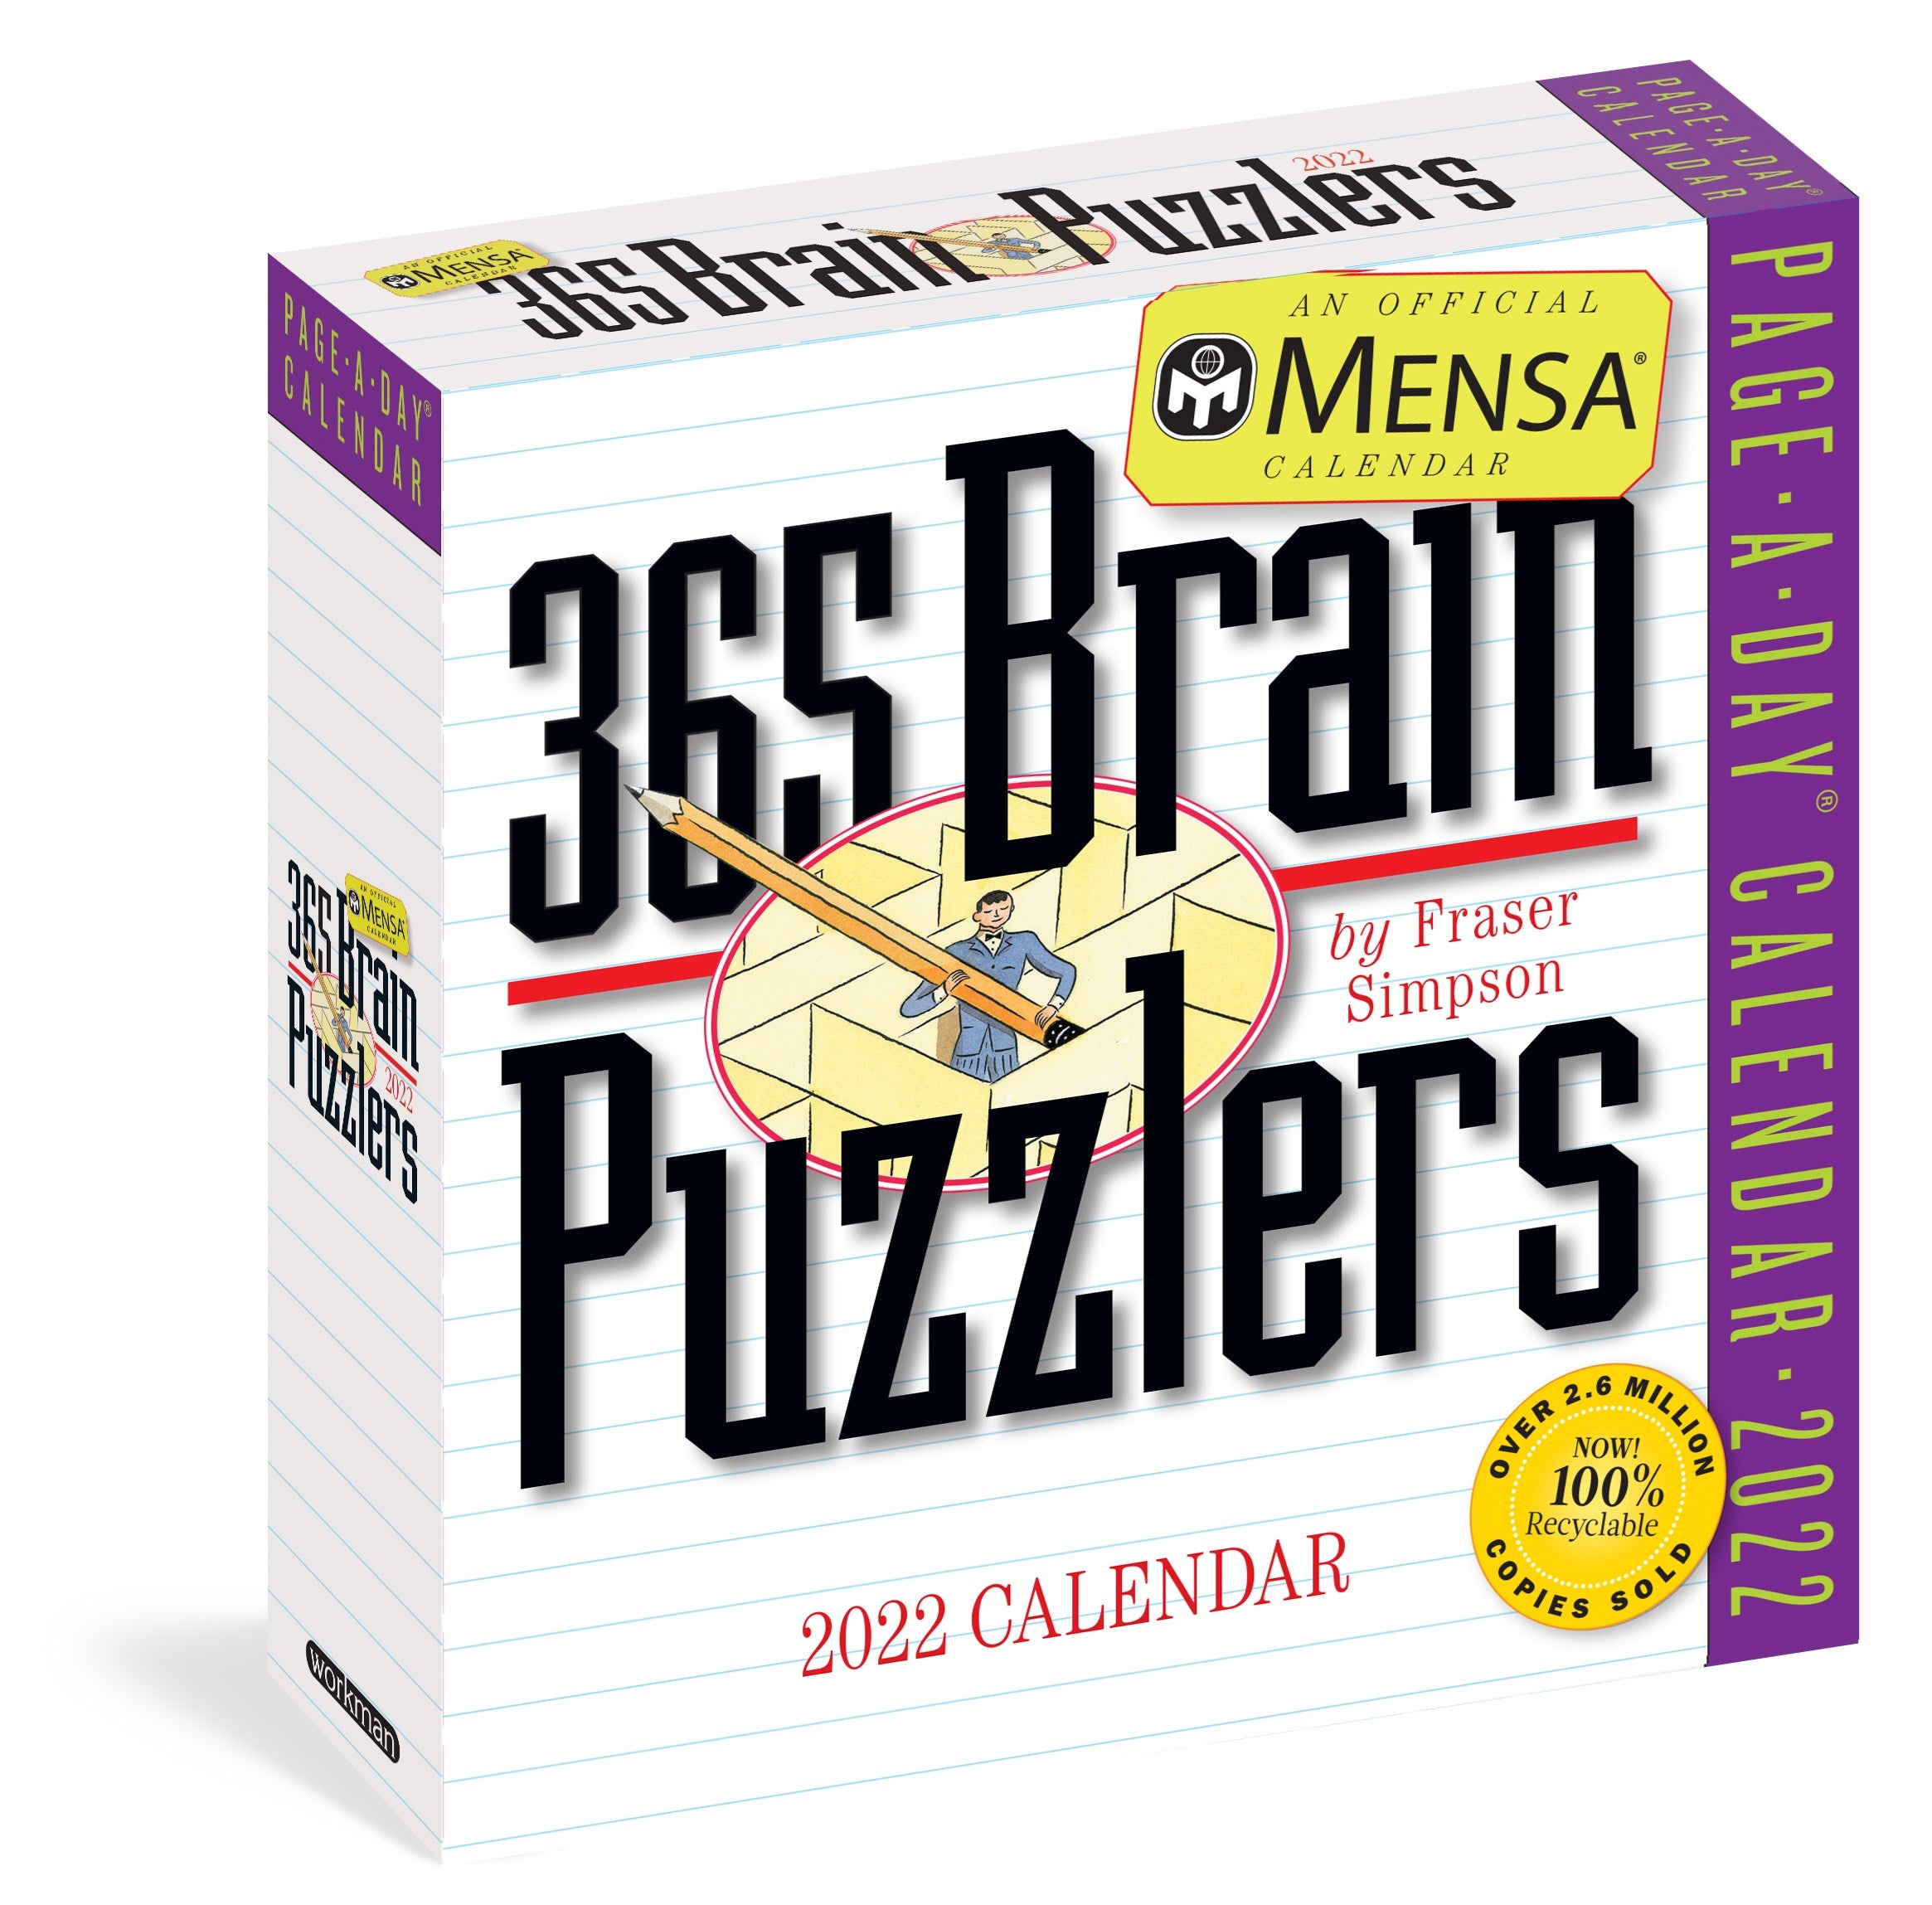 Mensa 365 Brain Puzzlers Page-A-Day Calendar 2022: A brain busting year of tough pangrams, word ladders, logic challenges, number sequences, and more.